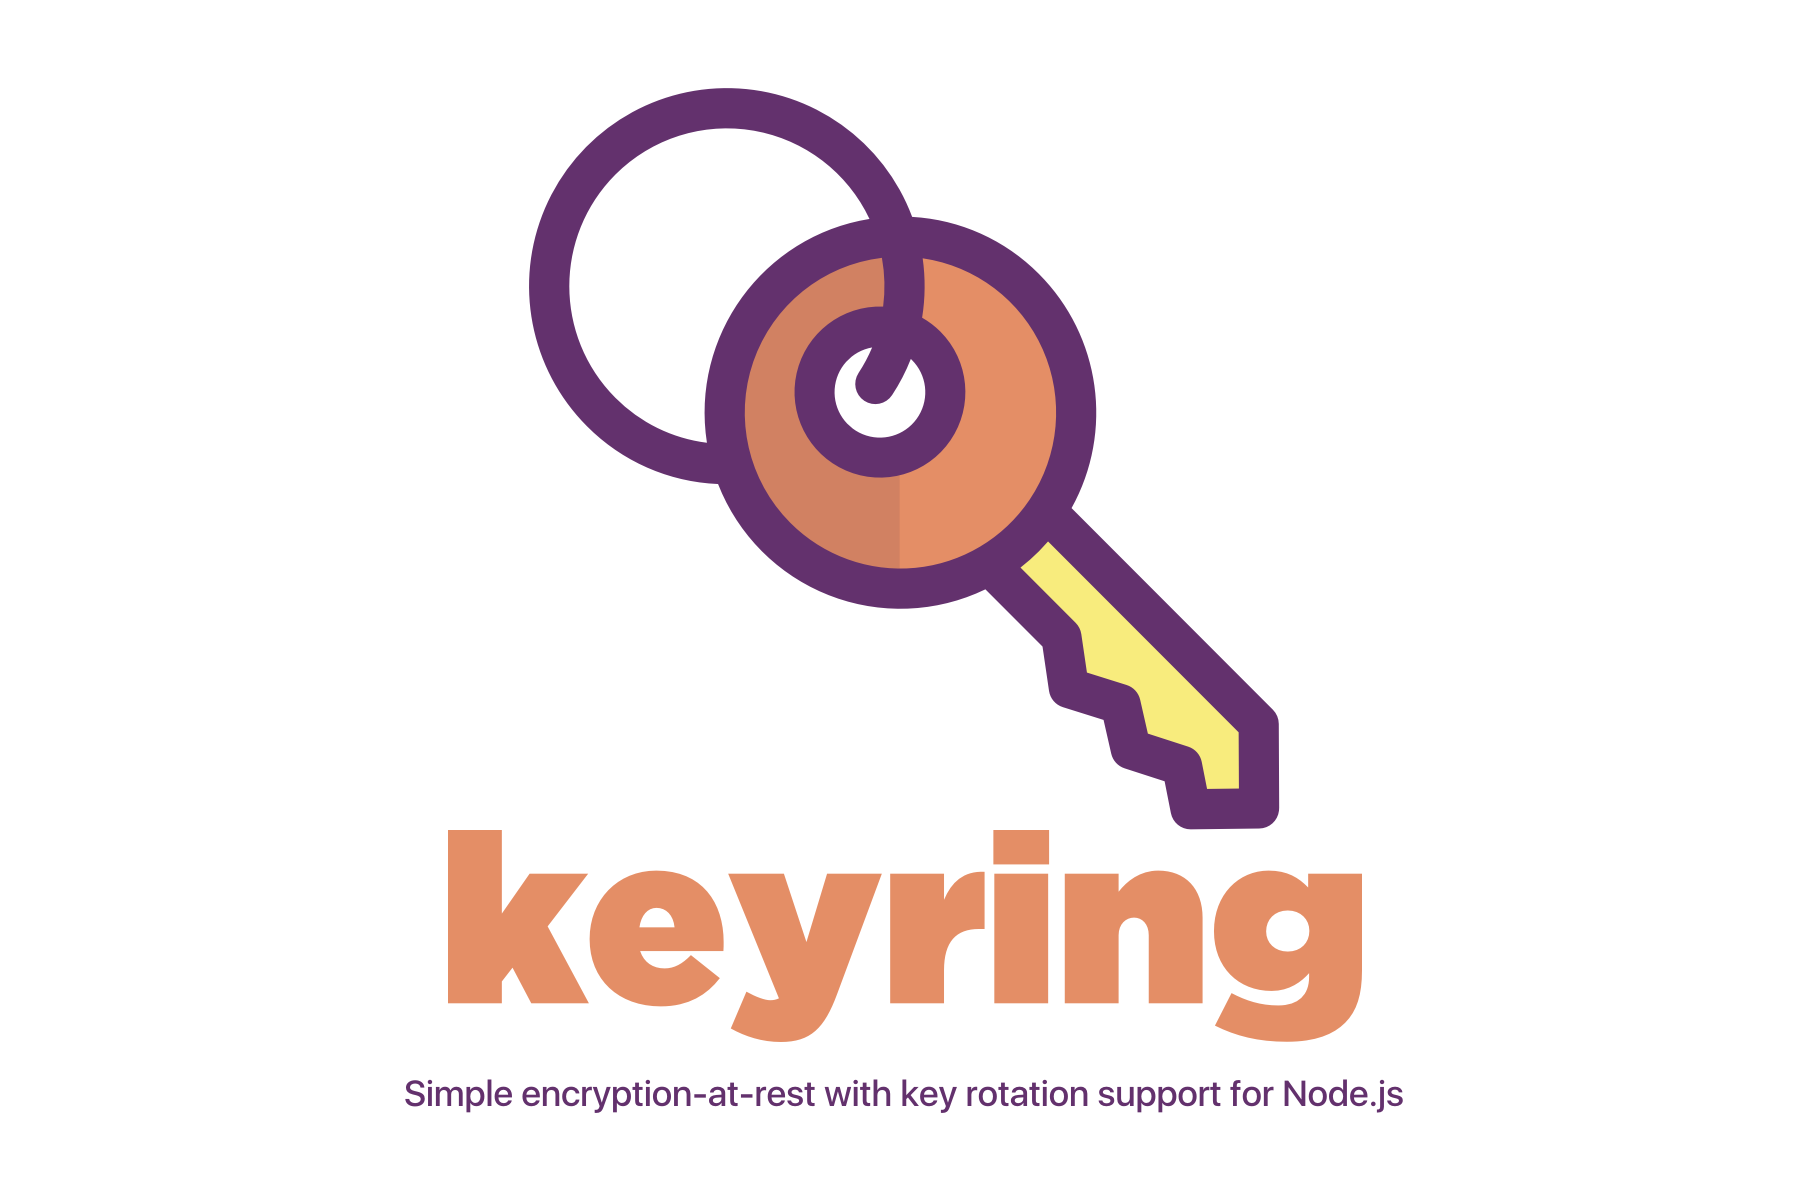 keyring: Simple encryption-at-rest with key rotation support for Node.js.